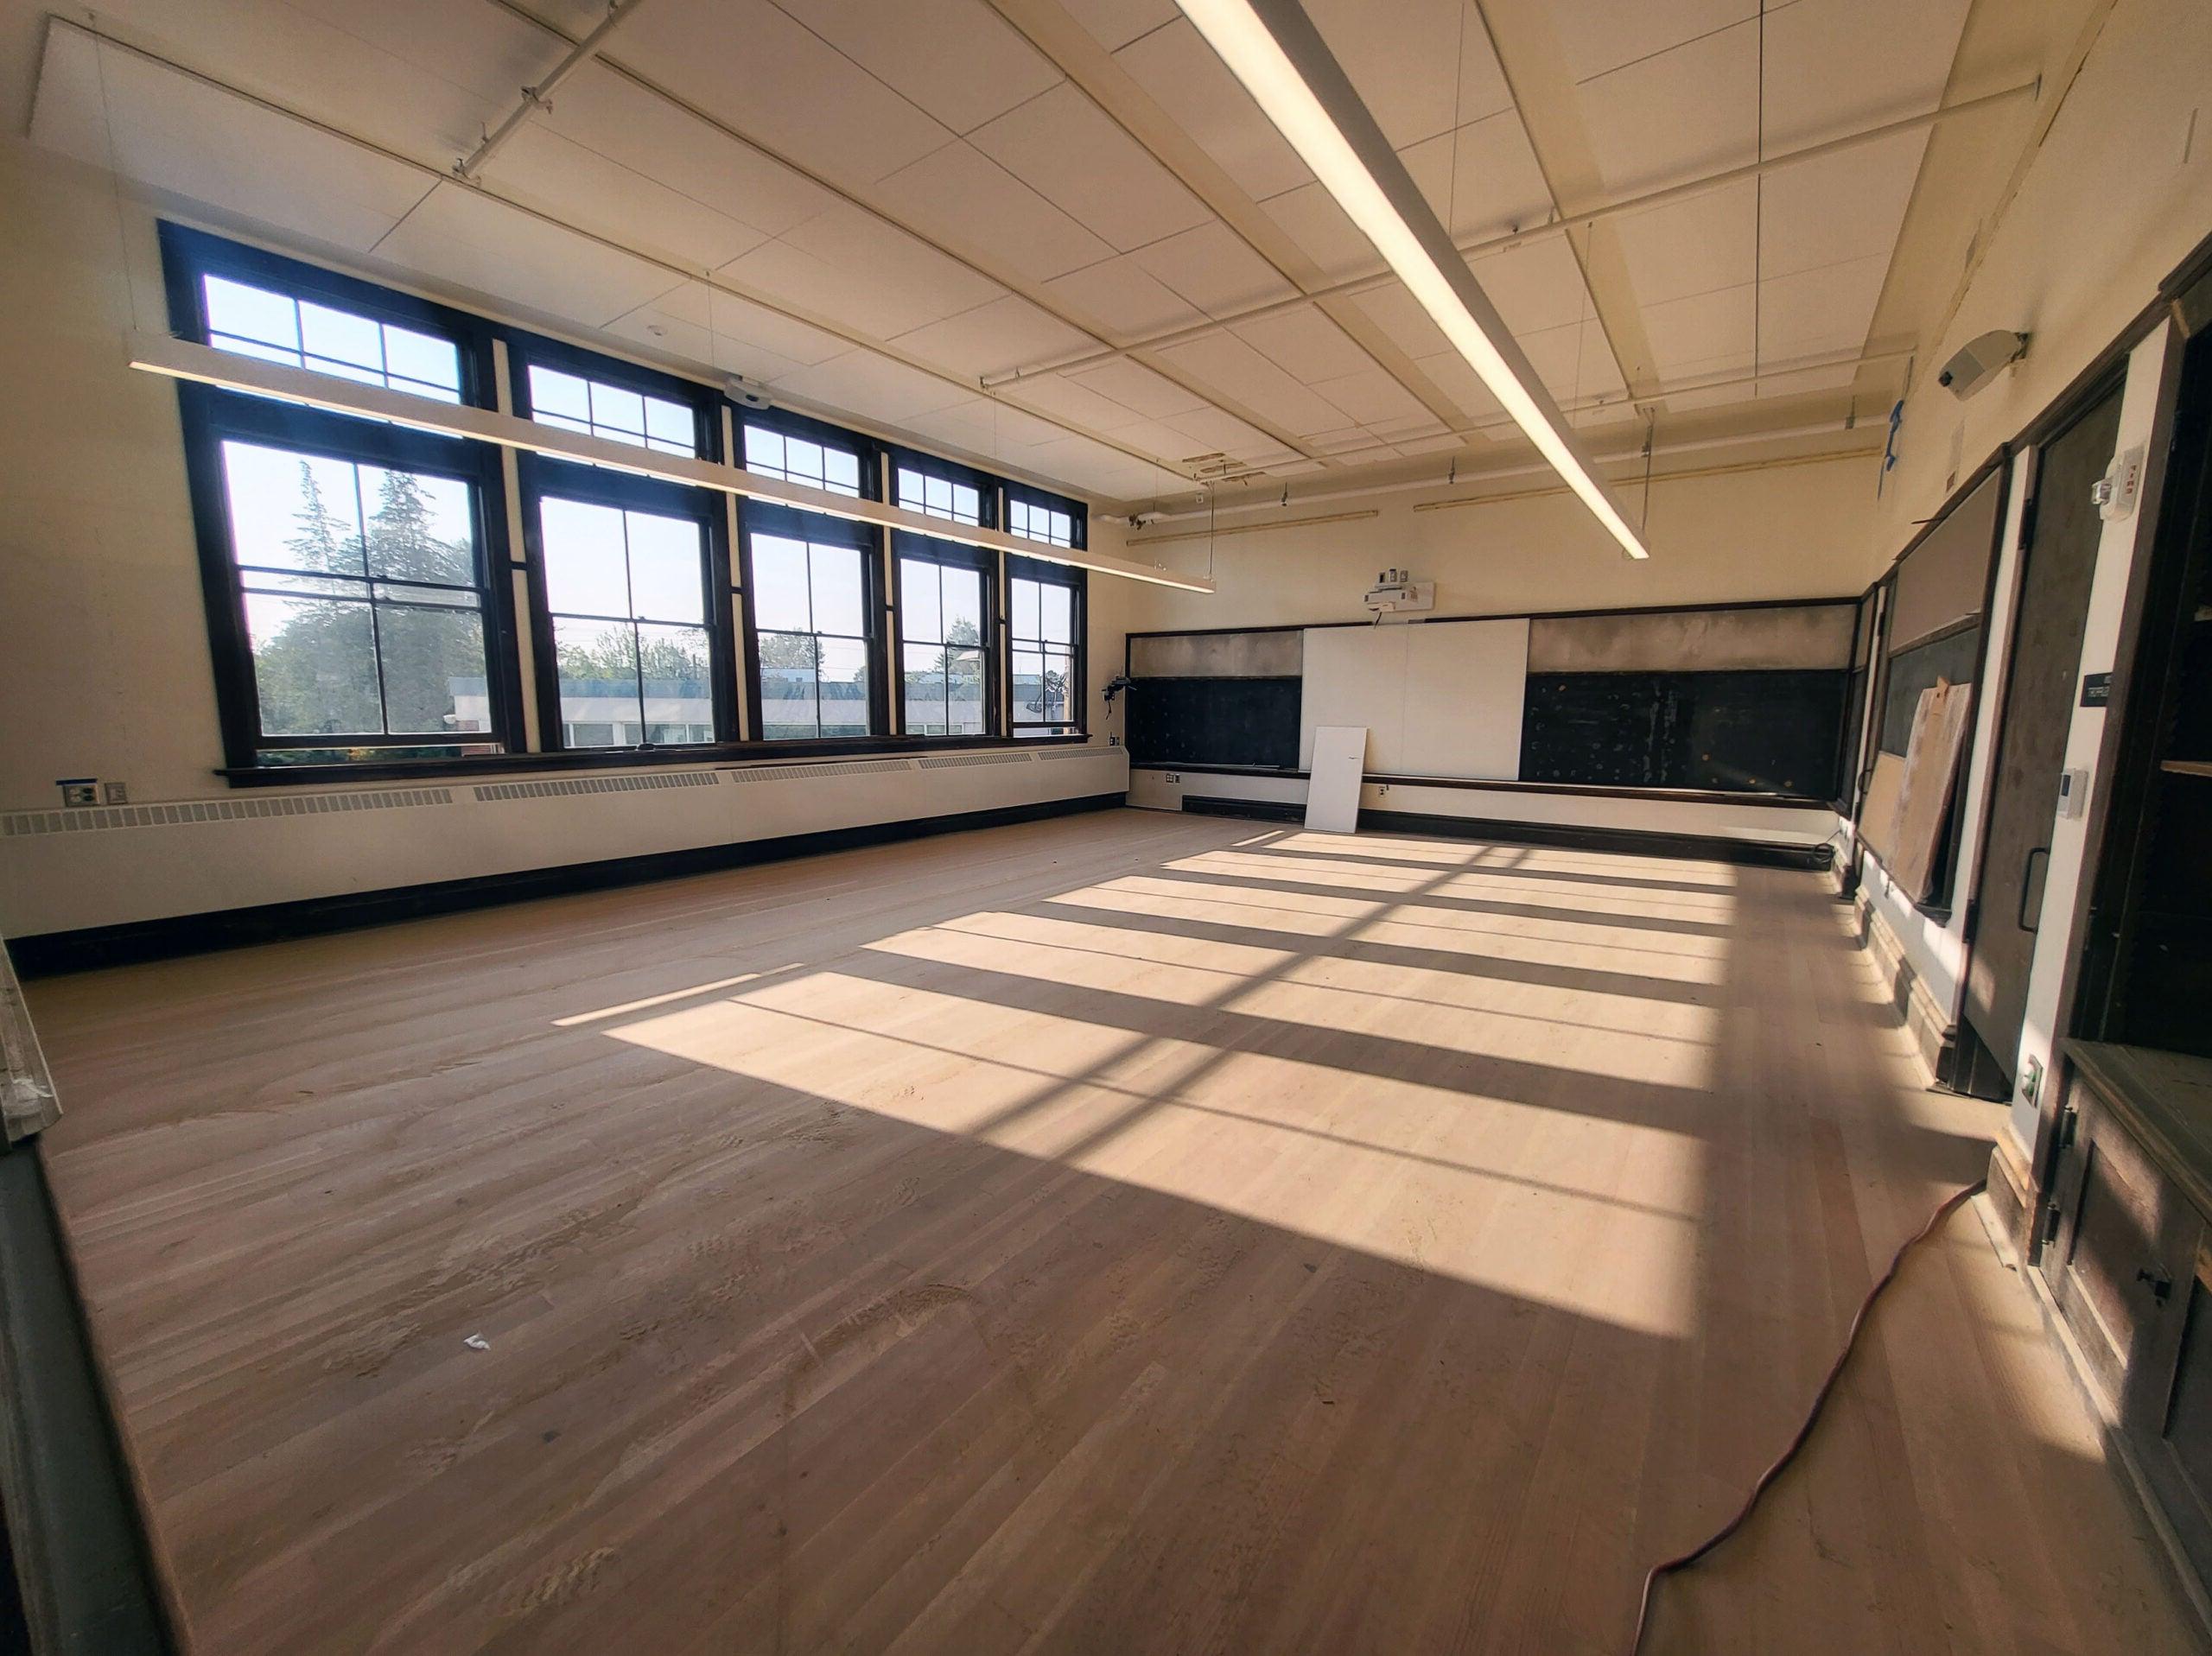 a classroom with a wood floor and wood framed windows